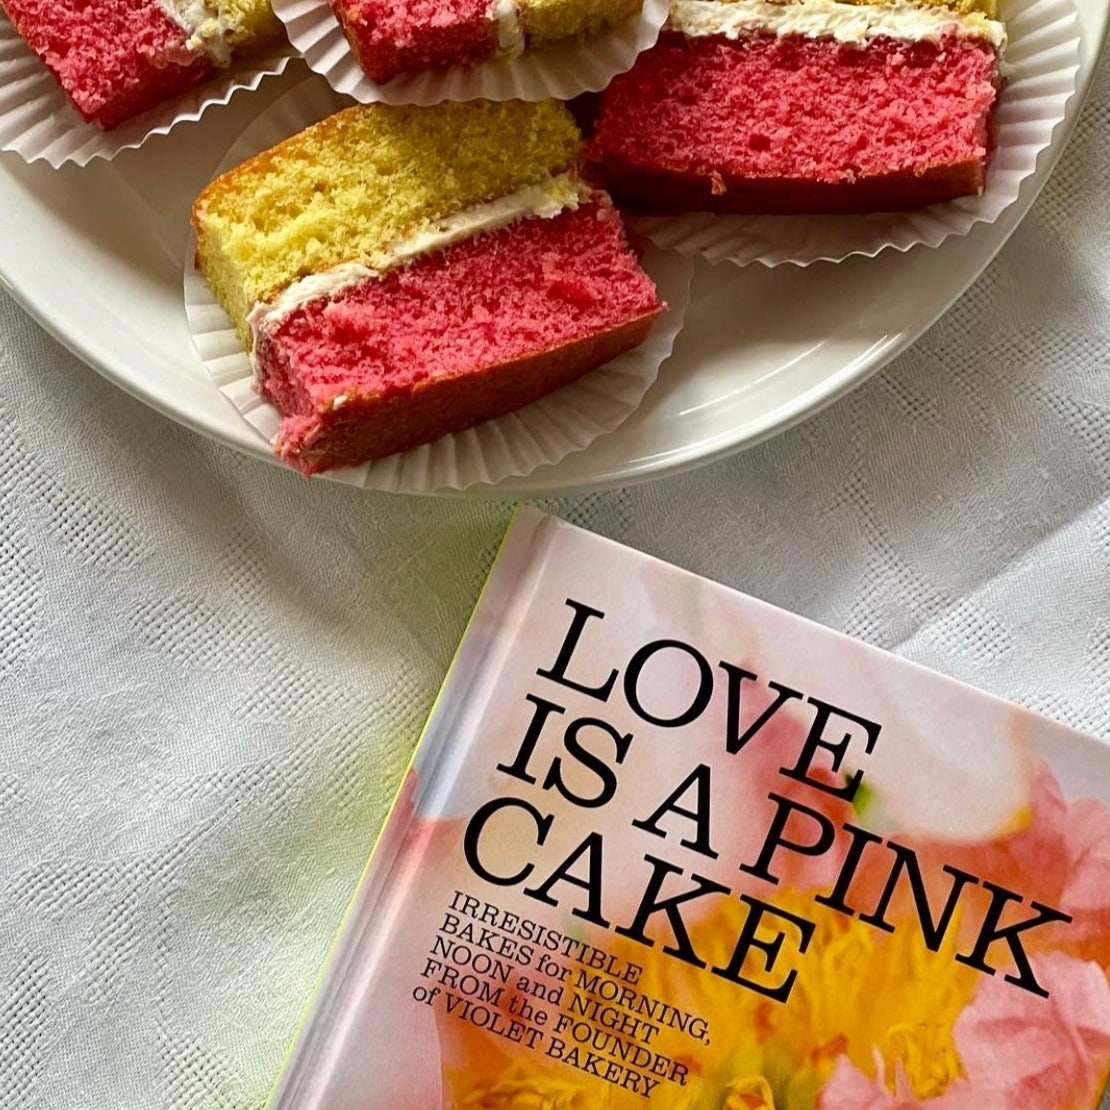 Love Is a Pink Cake: Irresistible Bakes for Morning, Noon, and Night